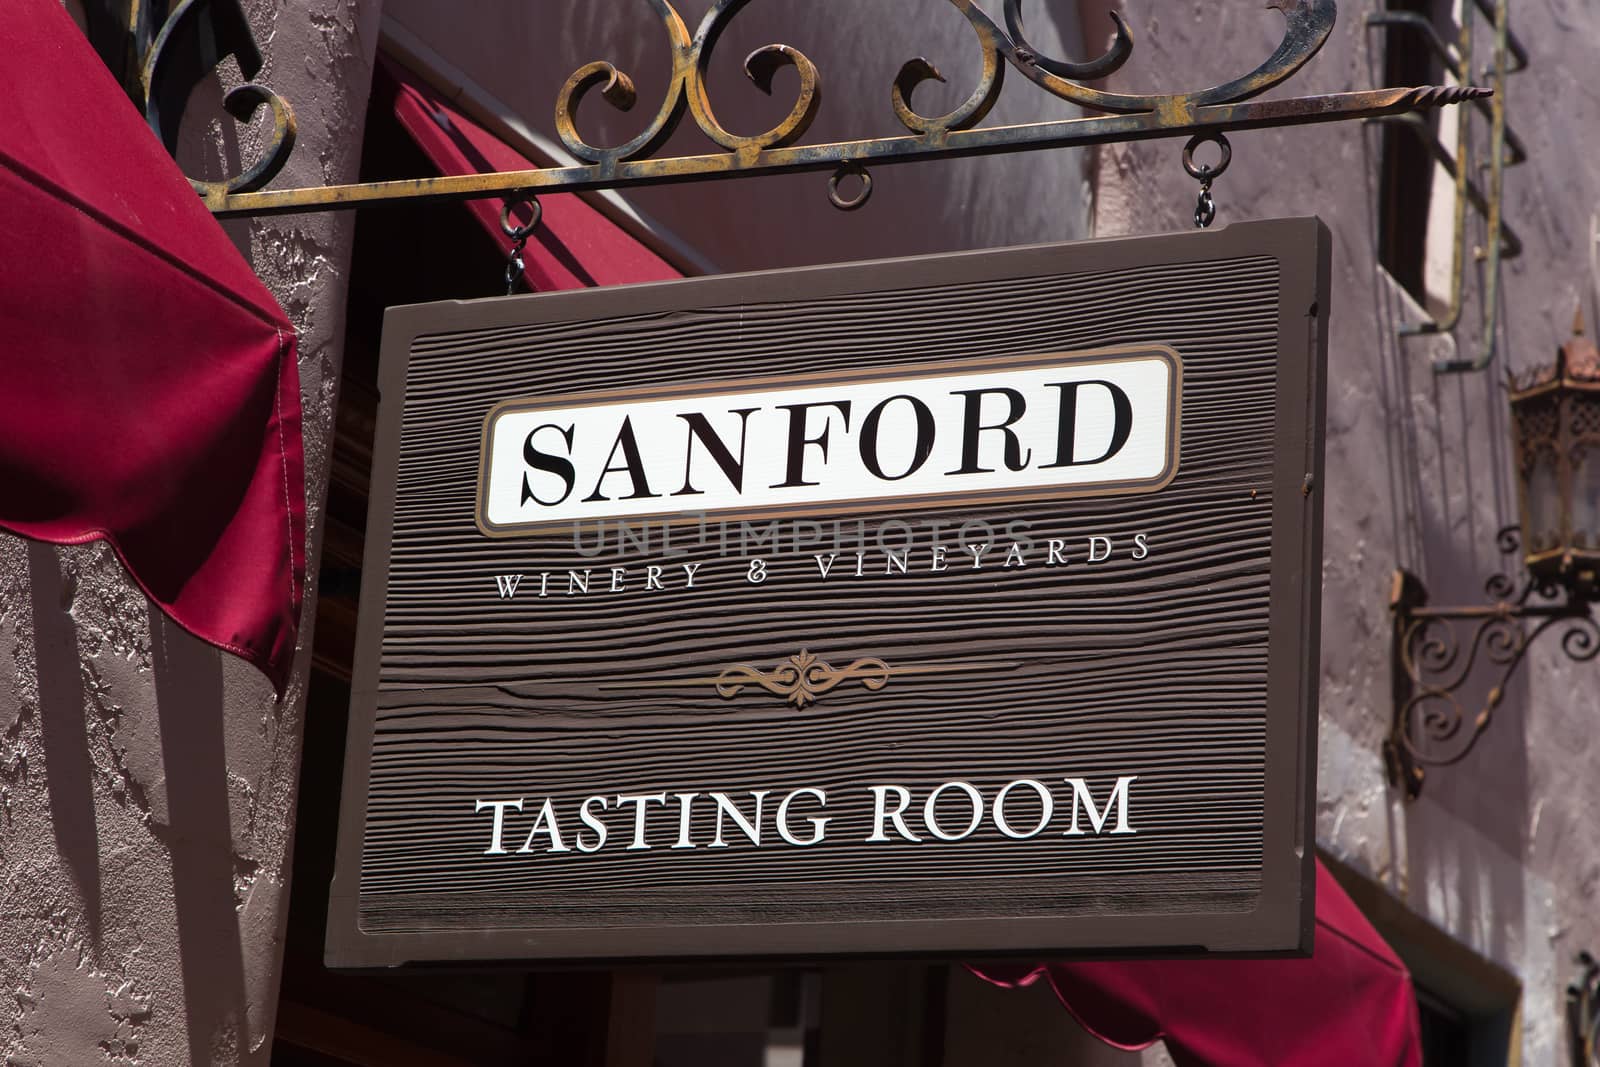 Sanford Tasting Room Exterior and Sign by wolterk